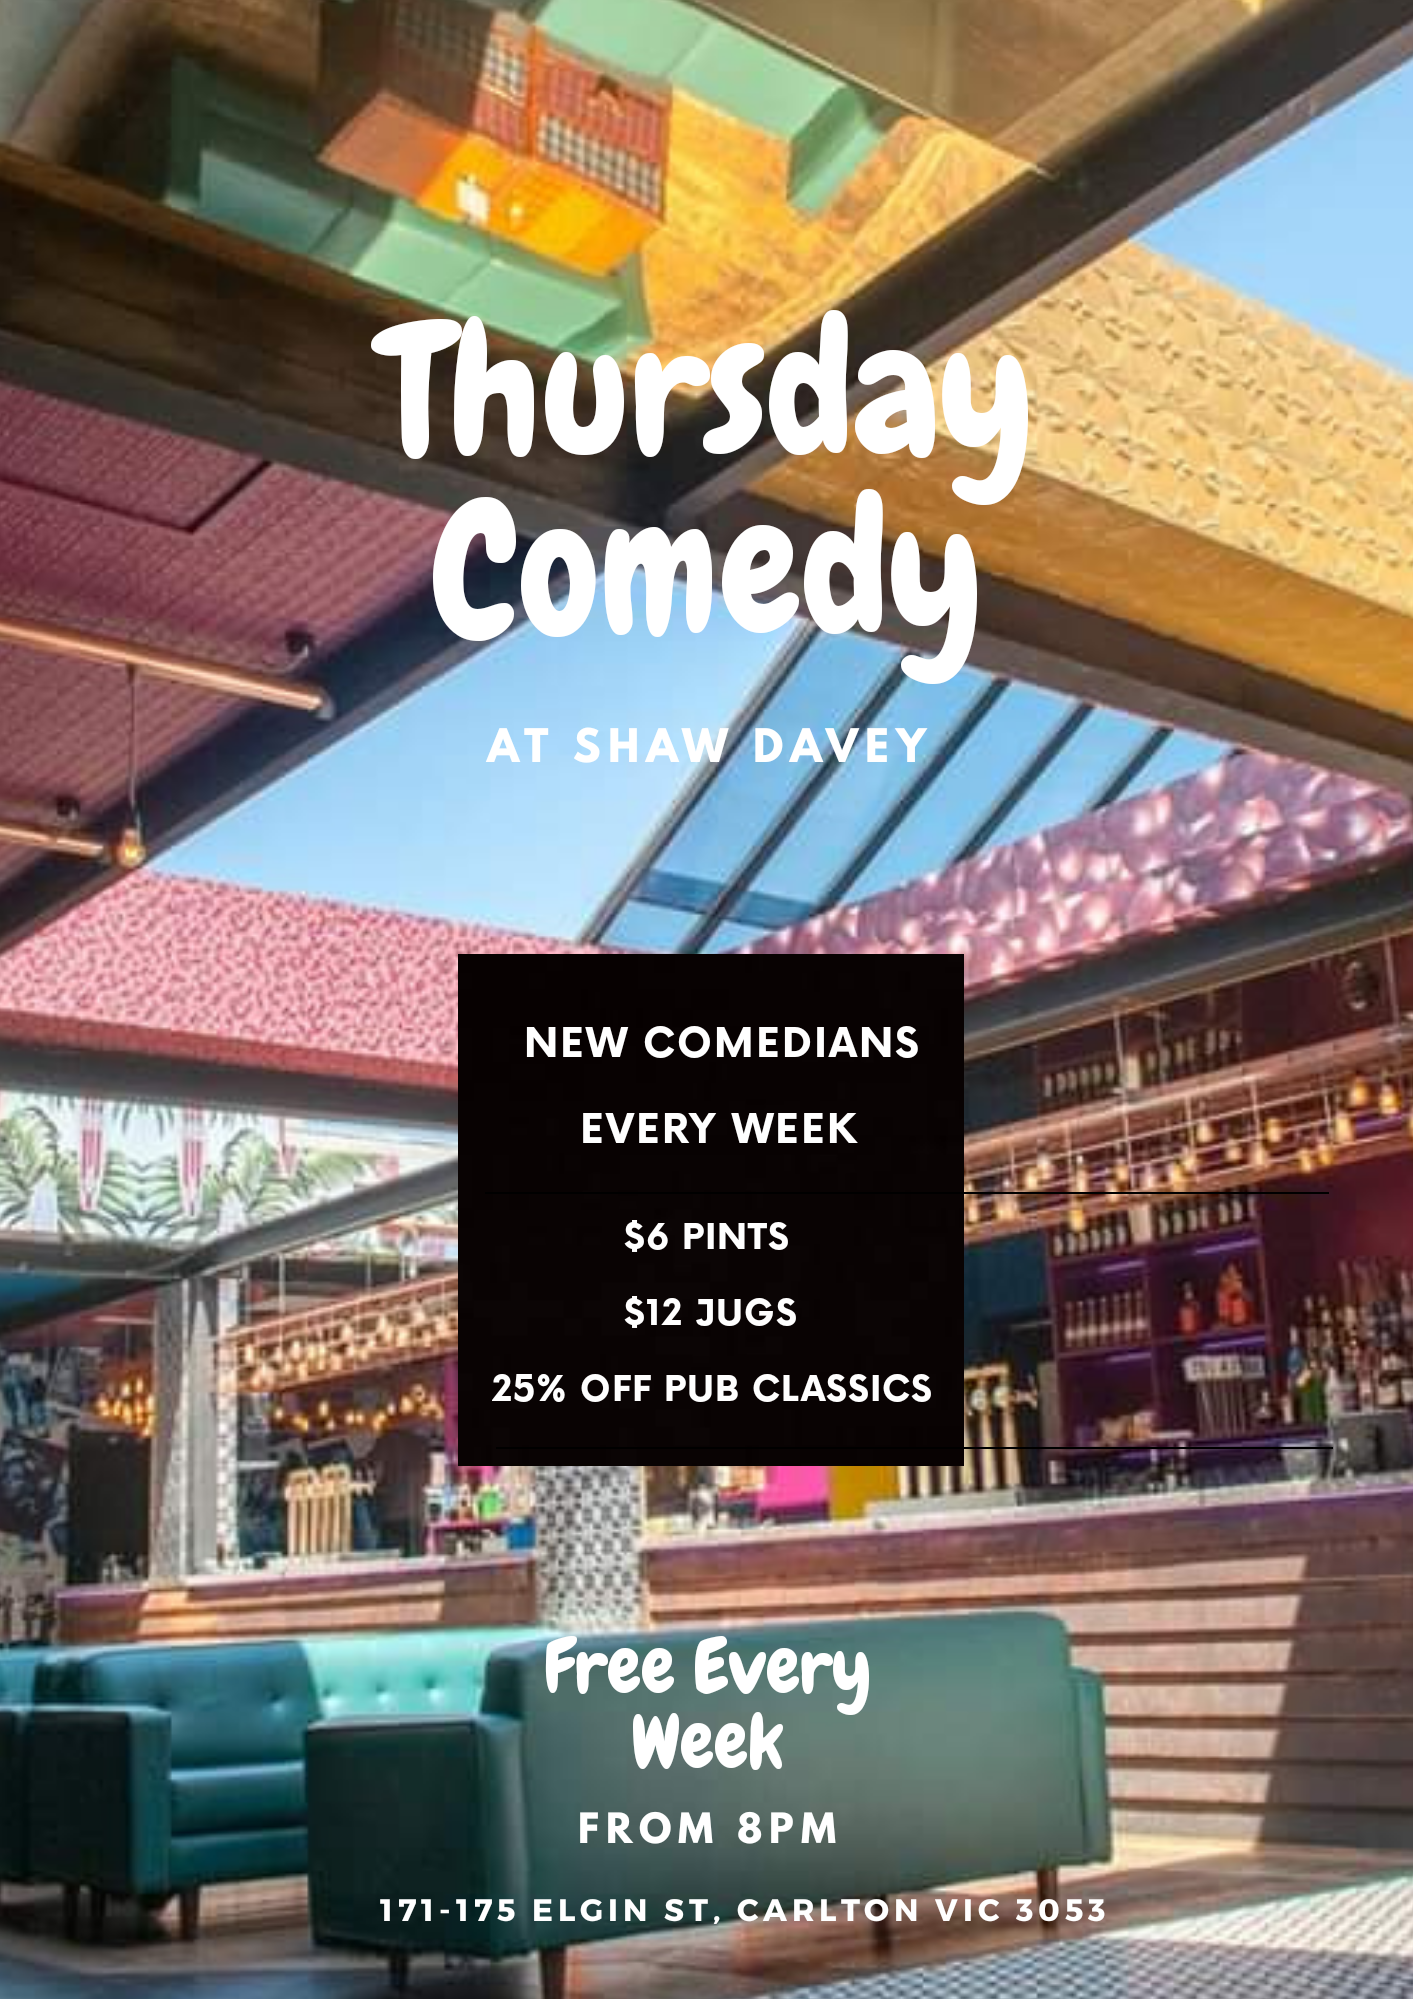 Thursday Comedy at Shaw Davey